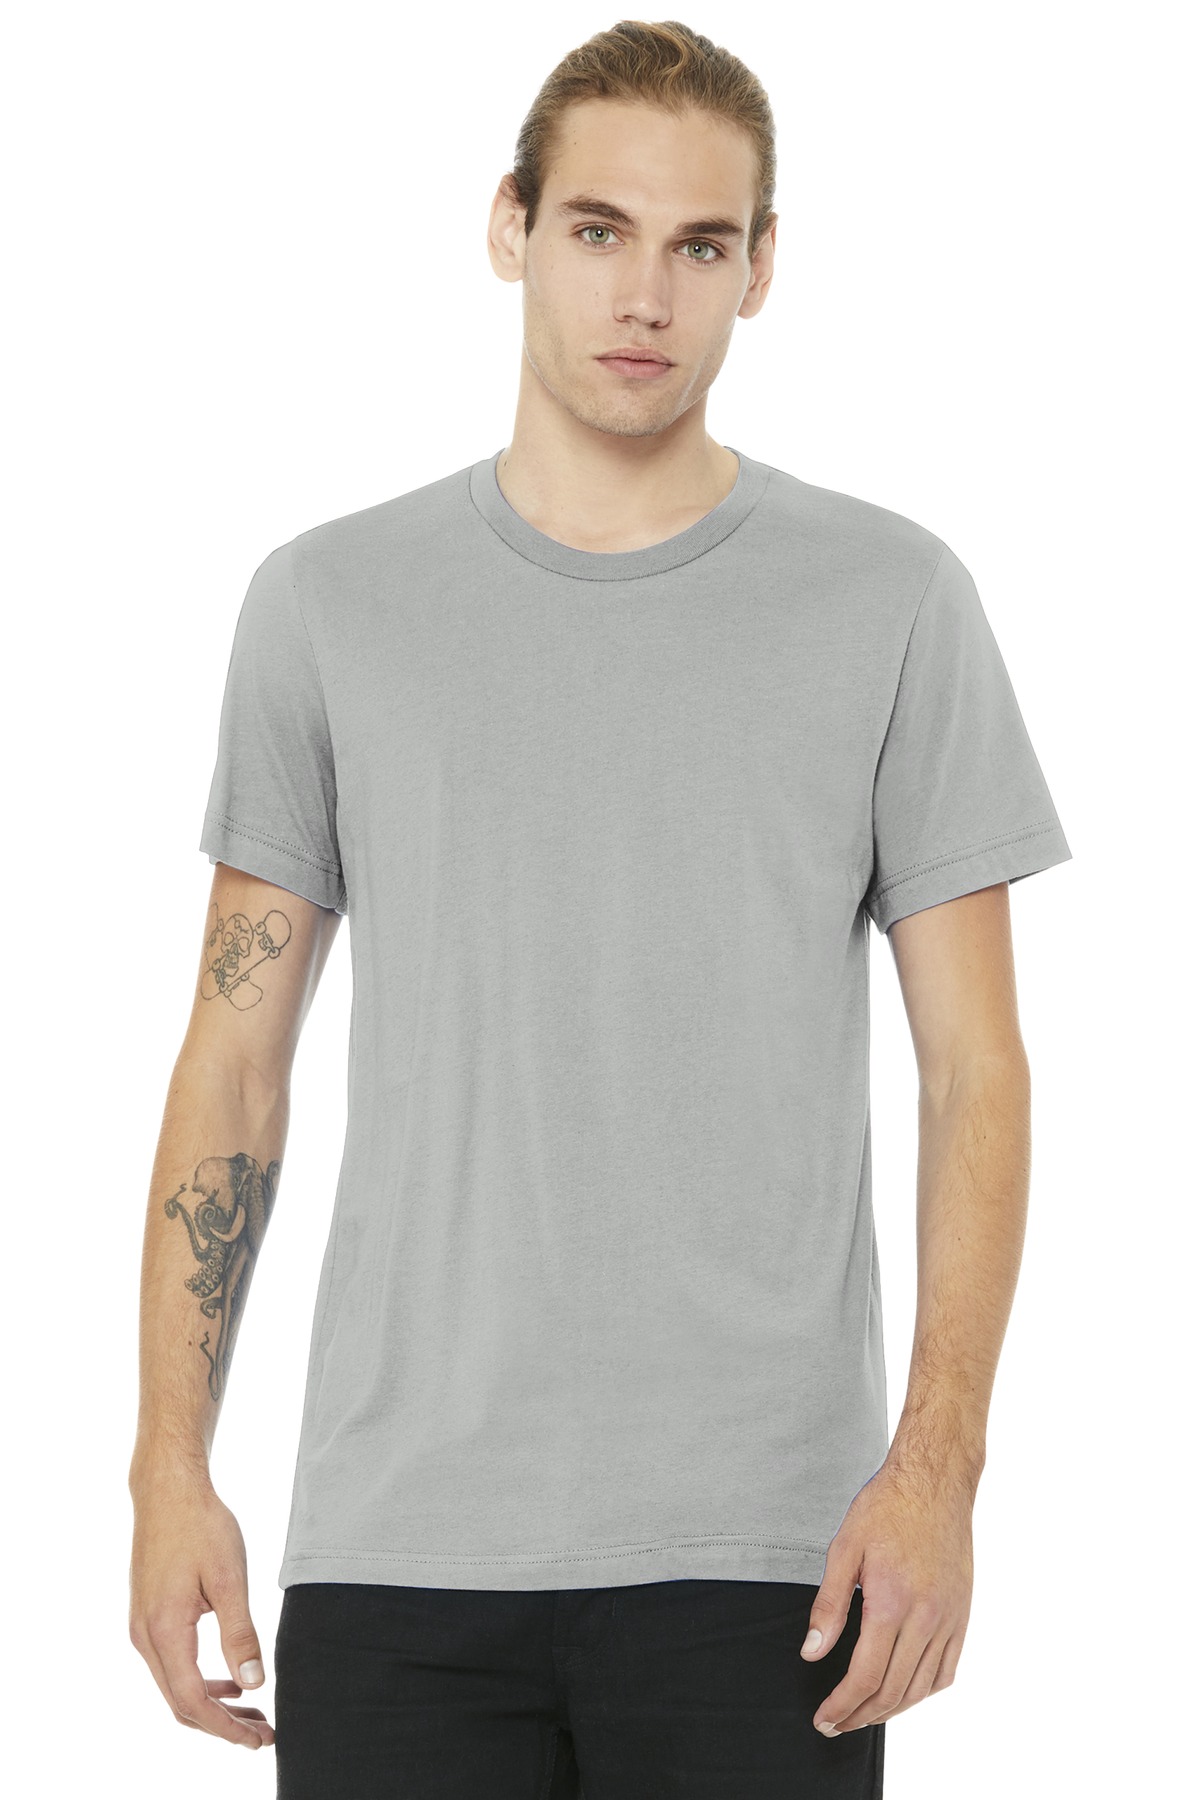 Bella Canvas 3001 Unisex Short Sleeve T-Shirts - Make Your Own Assorted  Color Set (2 | 3 | 4 | 5-Pack)